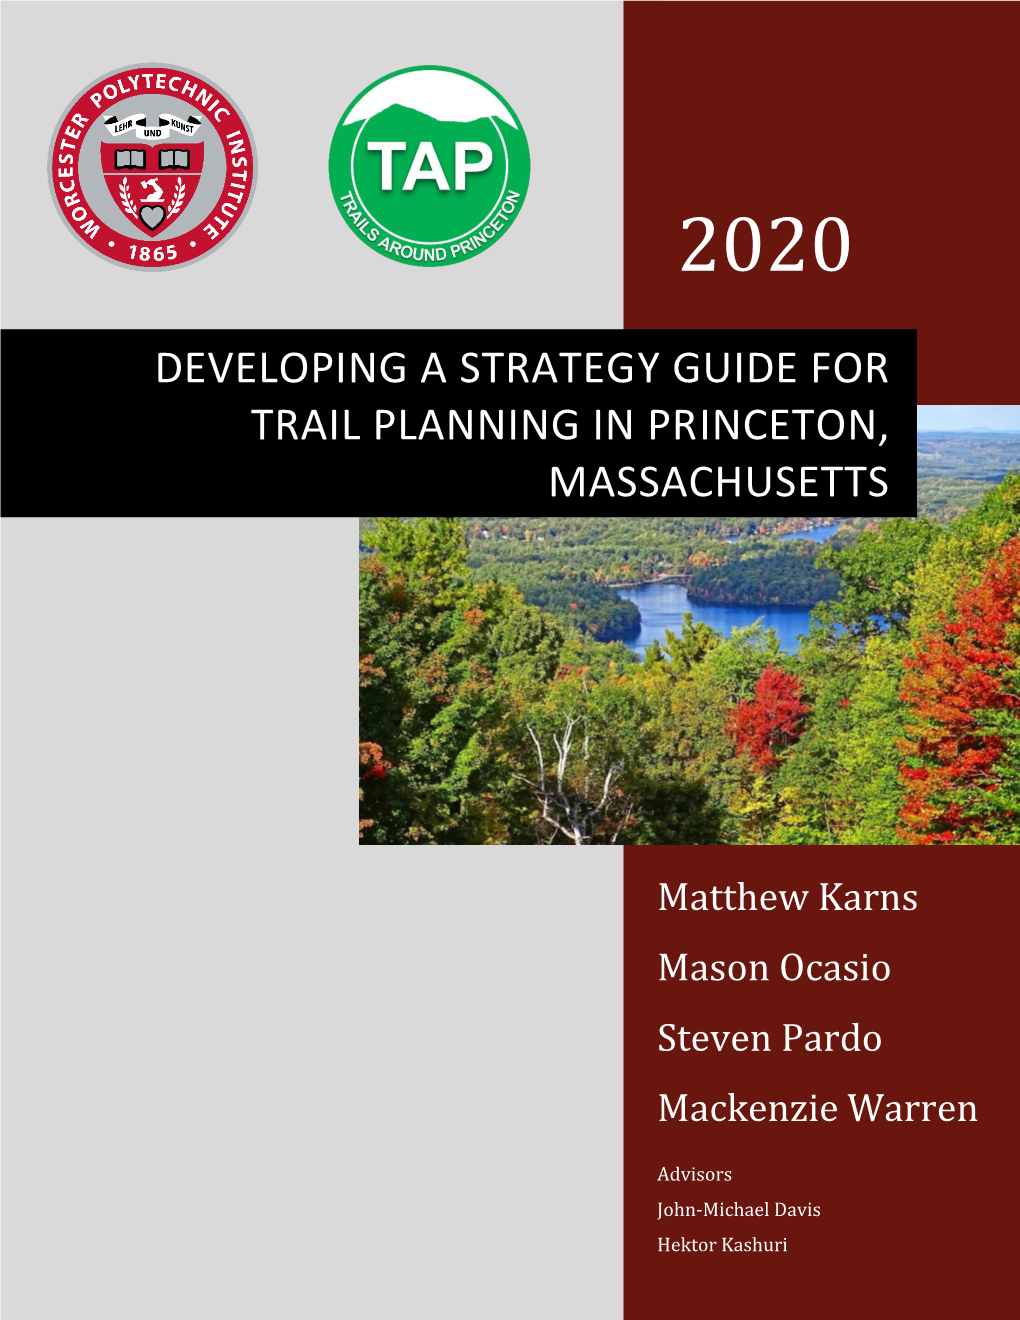 Developing a Strategy Guide for Trail Planning in Princeton, Massachusetts